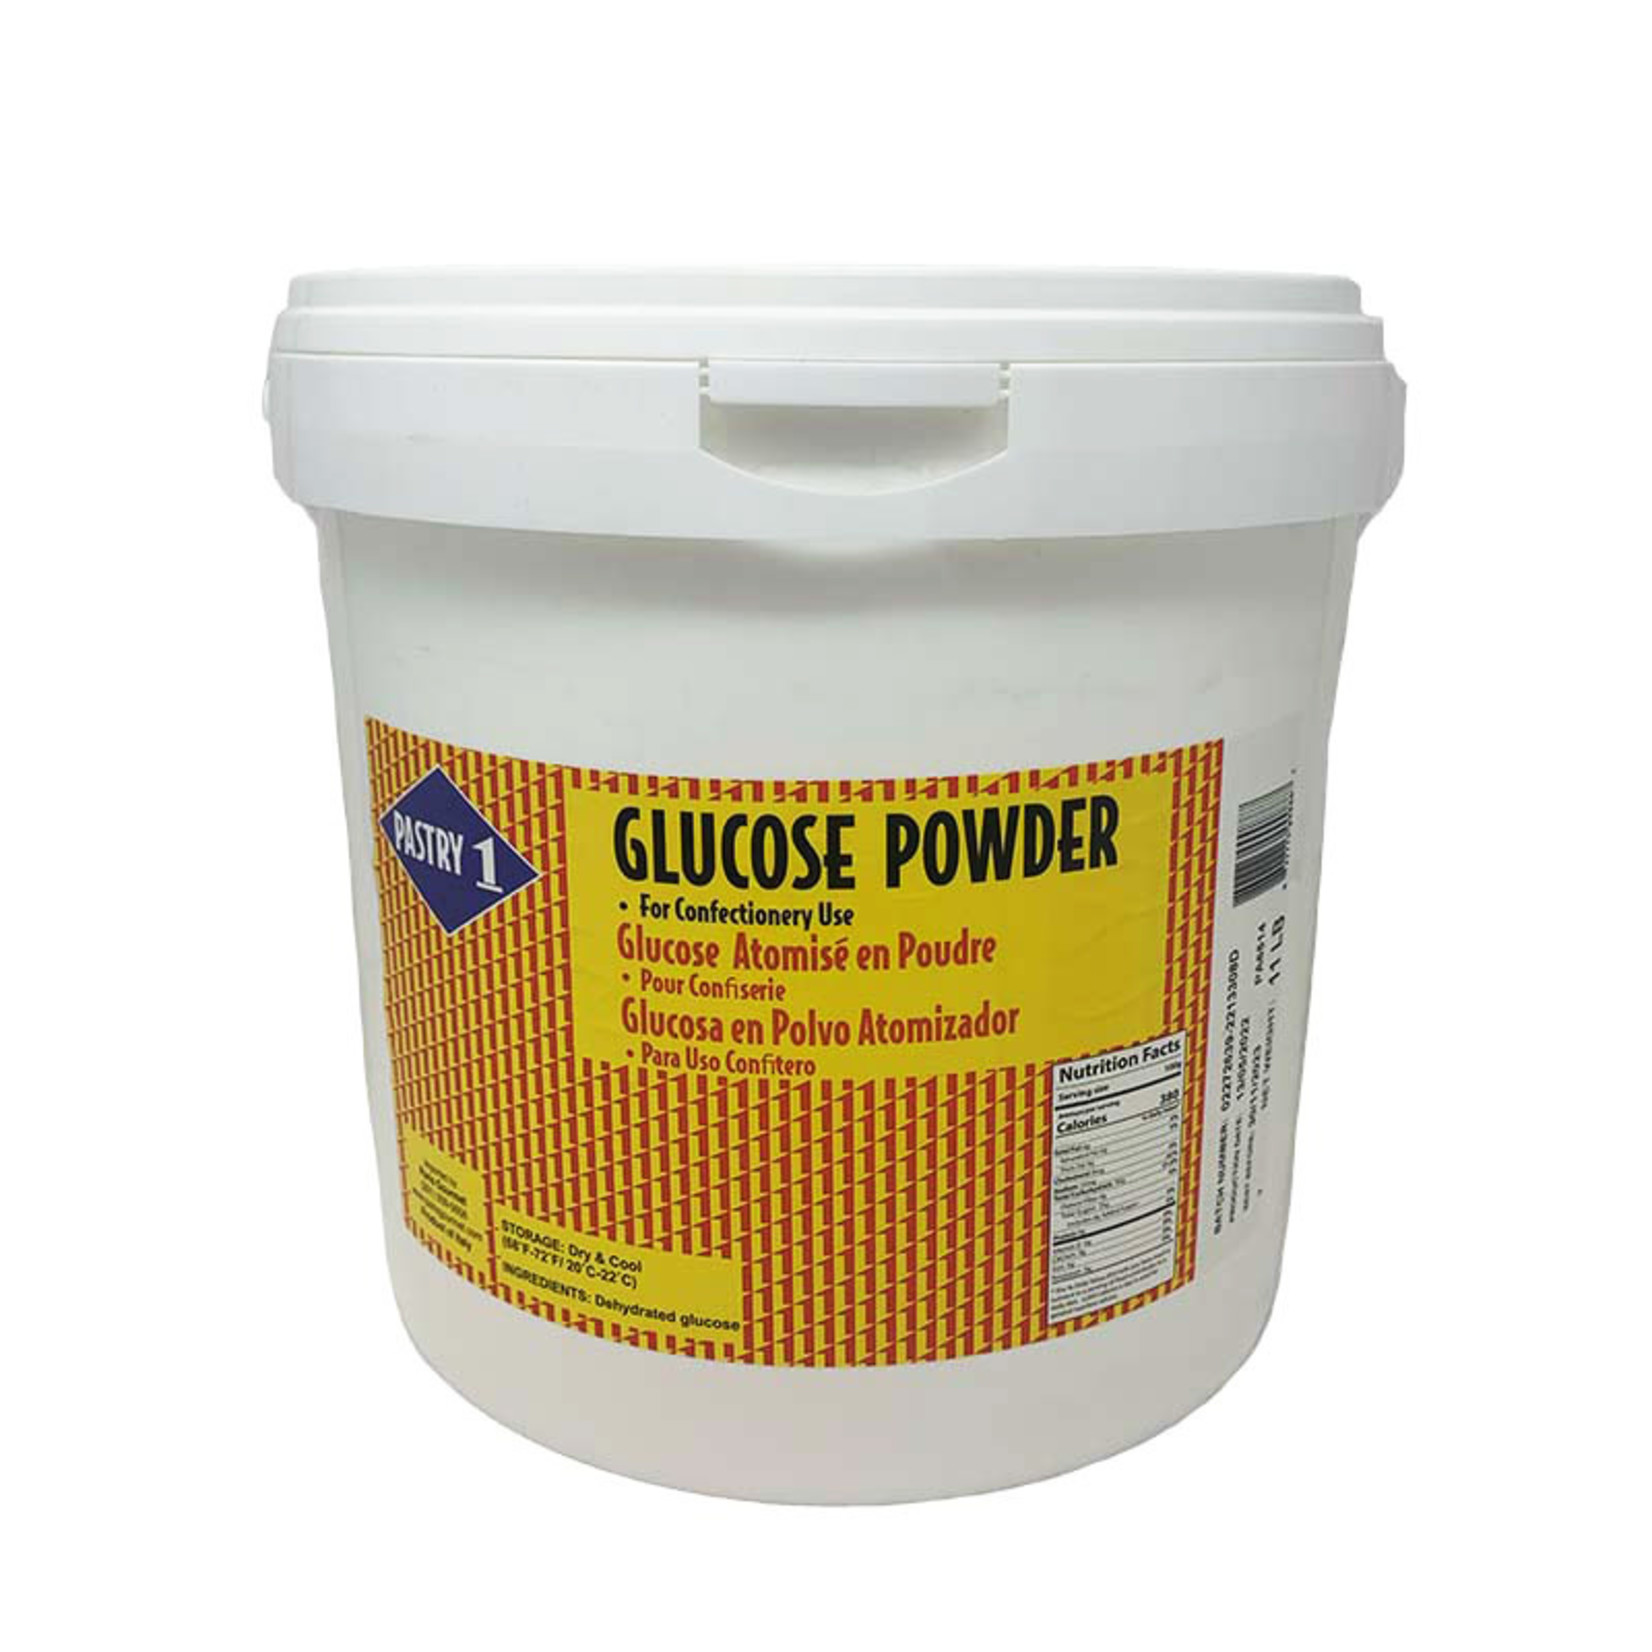 Pastry 1 Pastry 1 - Glucose Powder - 11 lb